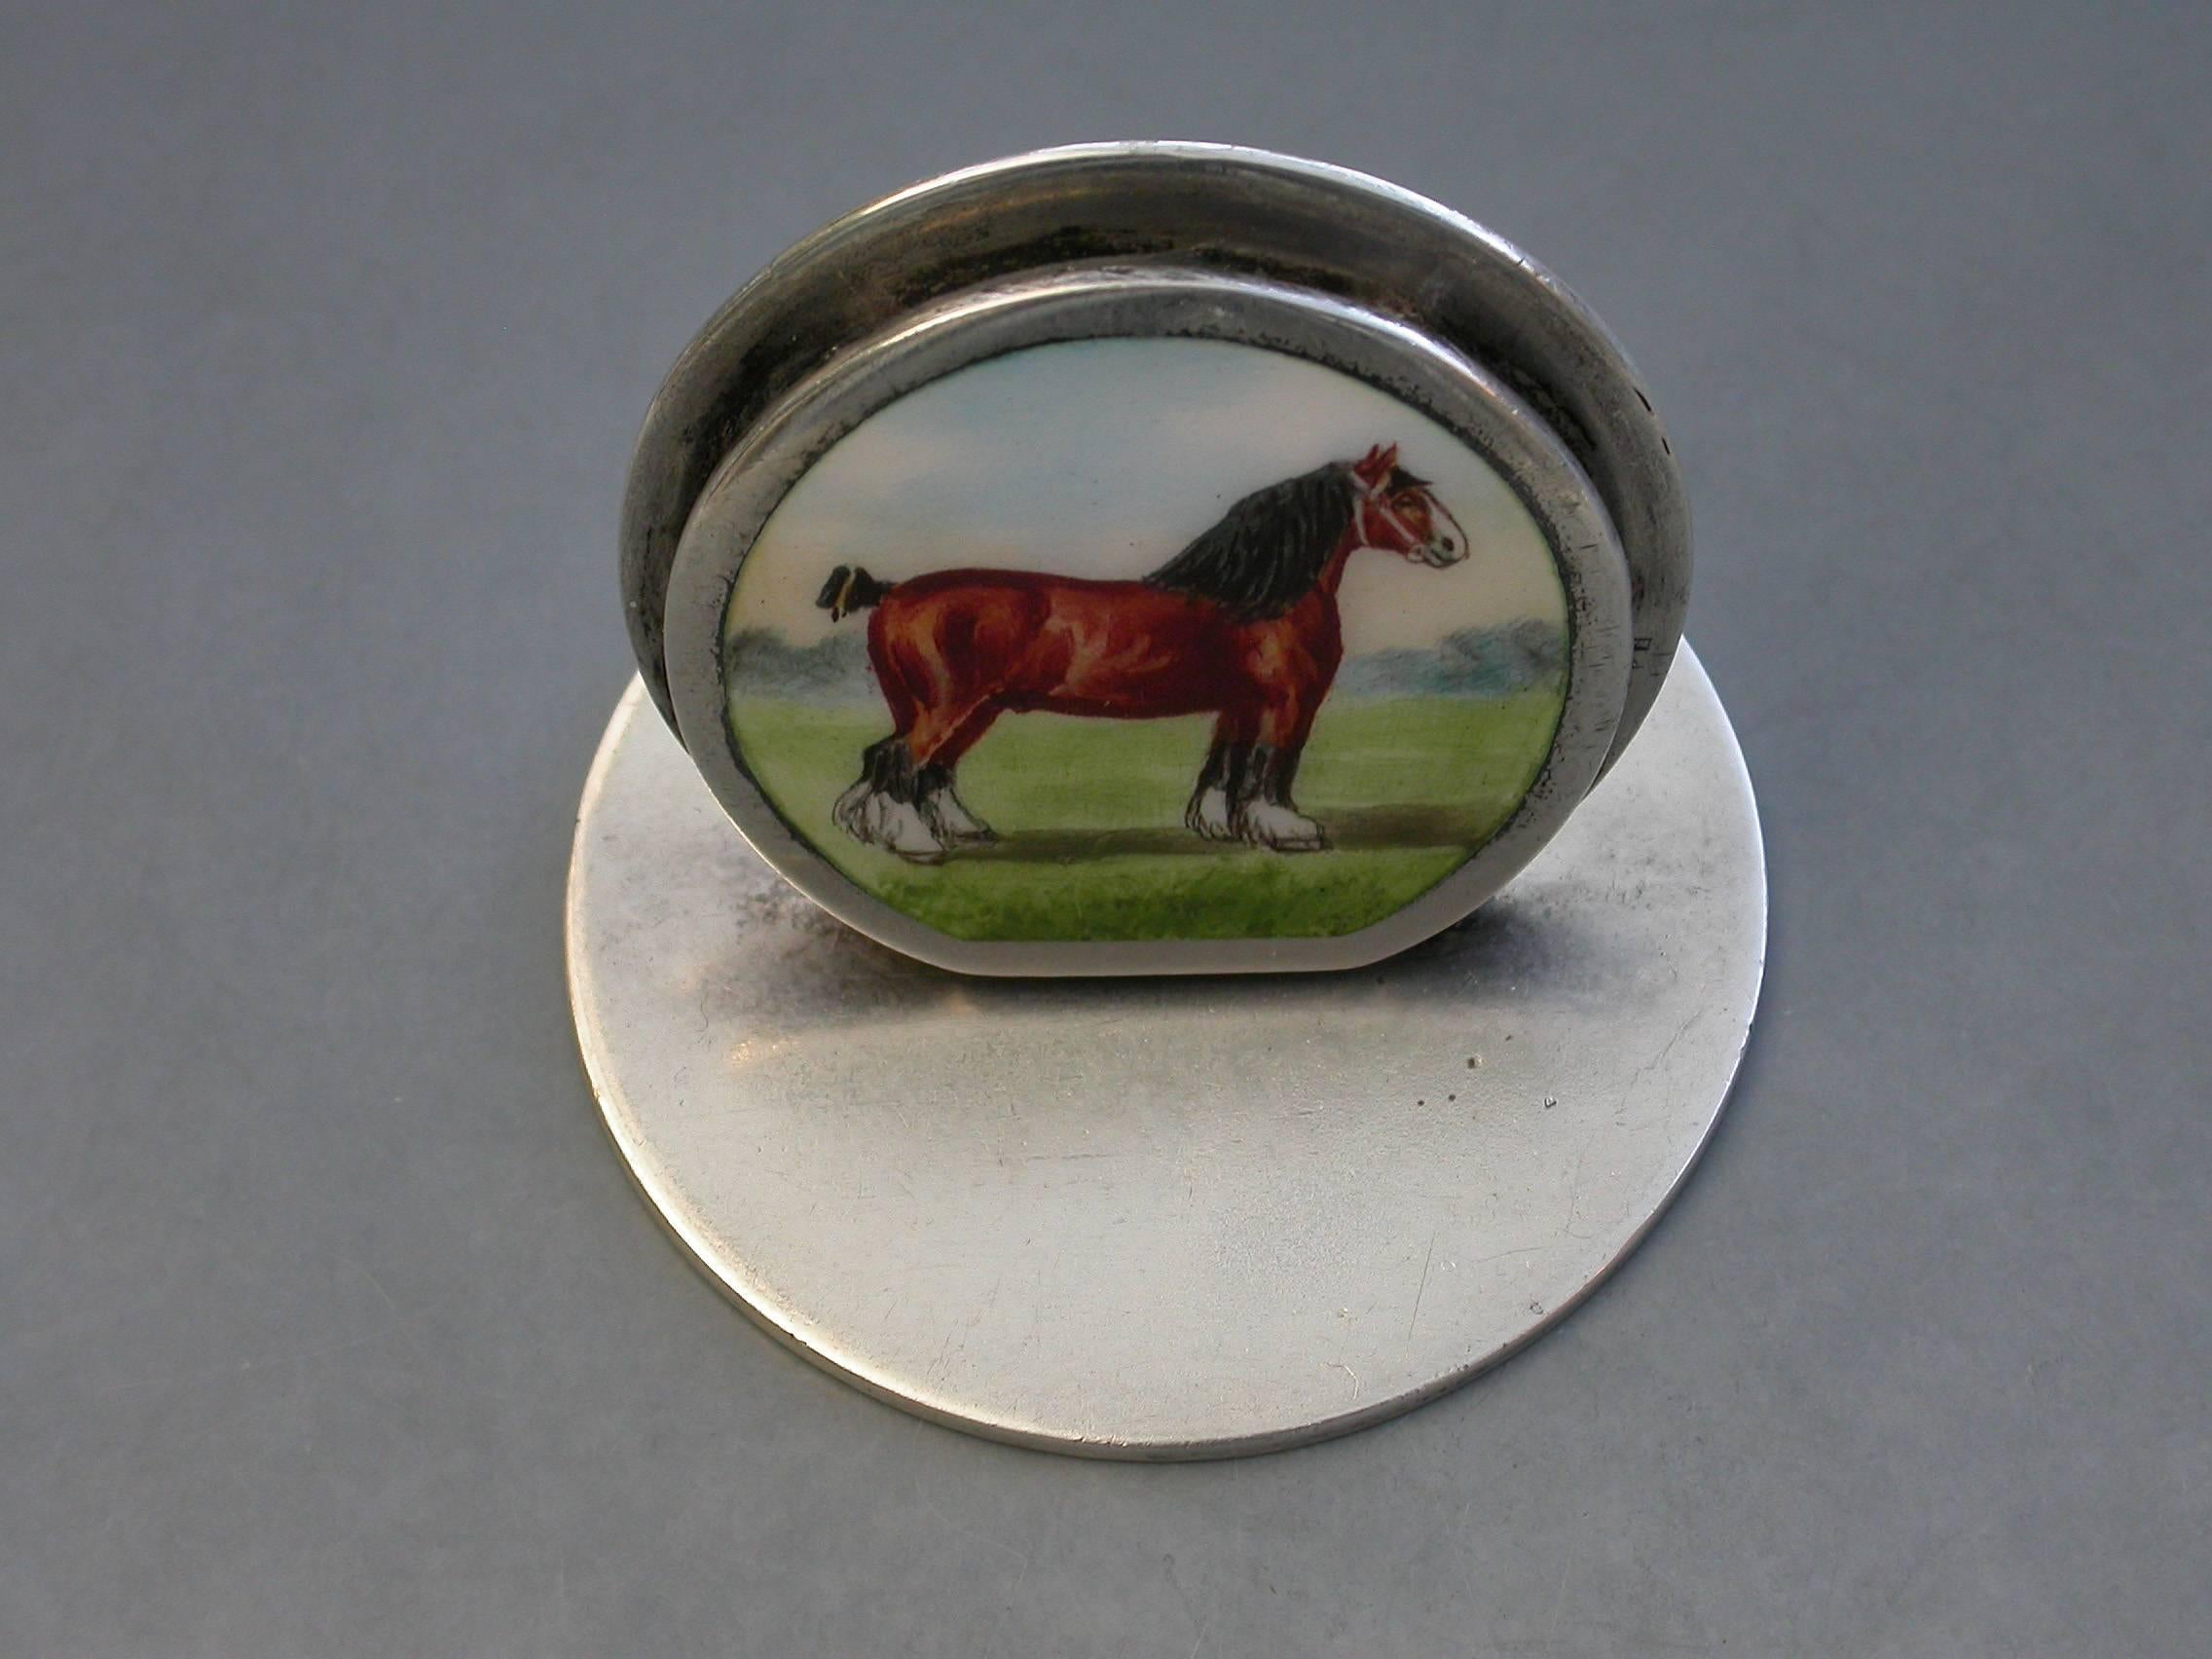 A fine and extremely rare Edwardian silver and enamel menu holder of double-disc form on a circular base, the sprung circular front panel finely enameled with a Shire Horse in a landscape scene.

By Sampson Mordan & Co, Chester, 1906

In good